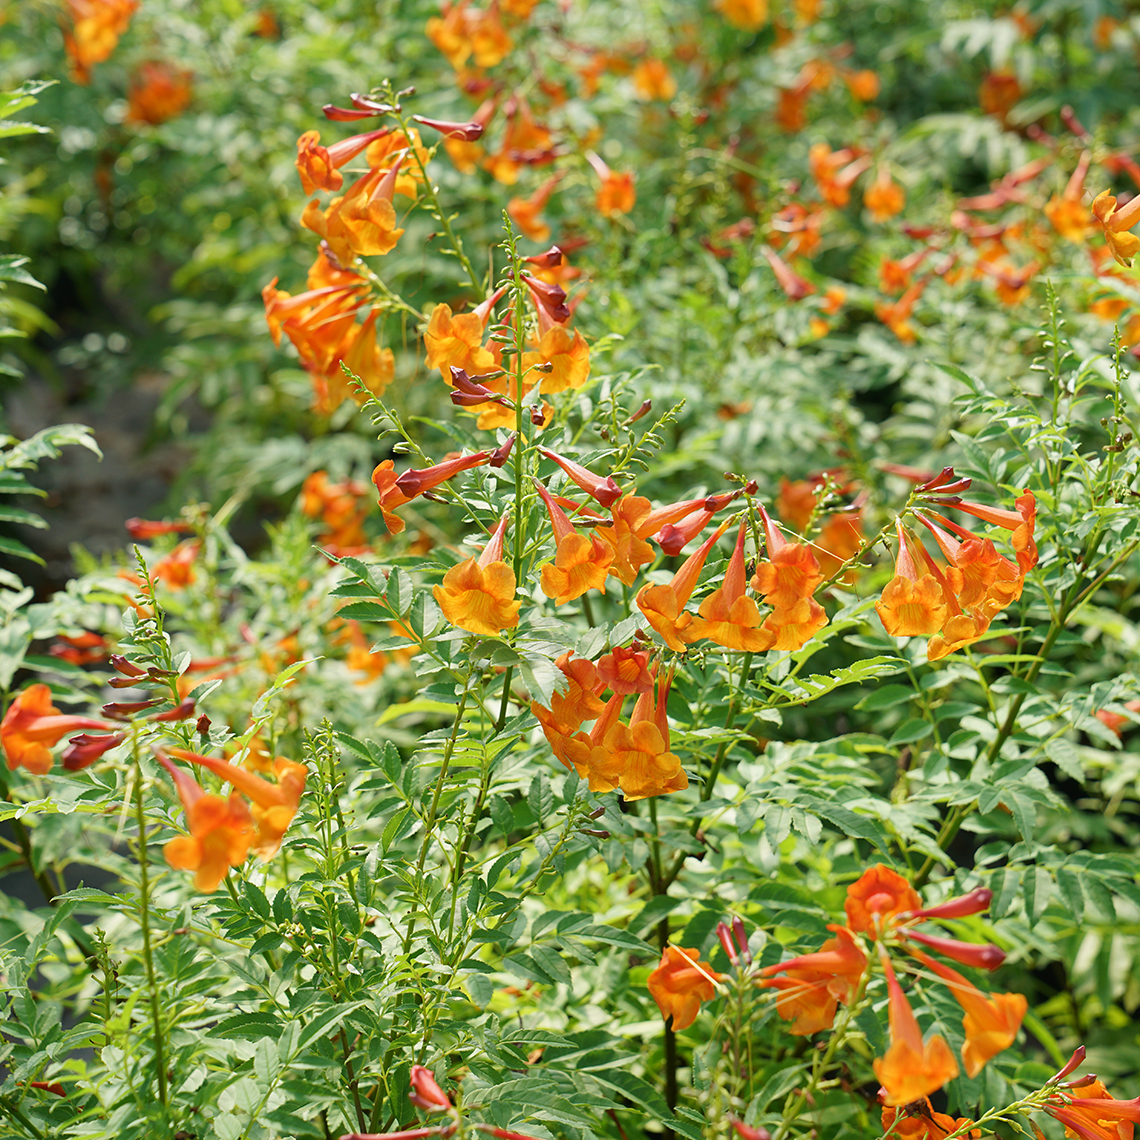 Tecoma Chicklet Orange in summer with bright orange blooms and green foliage.